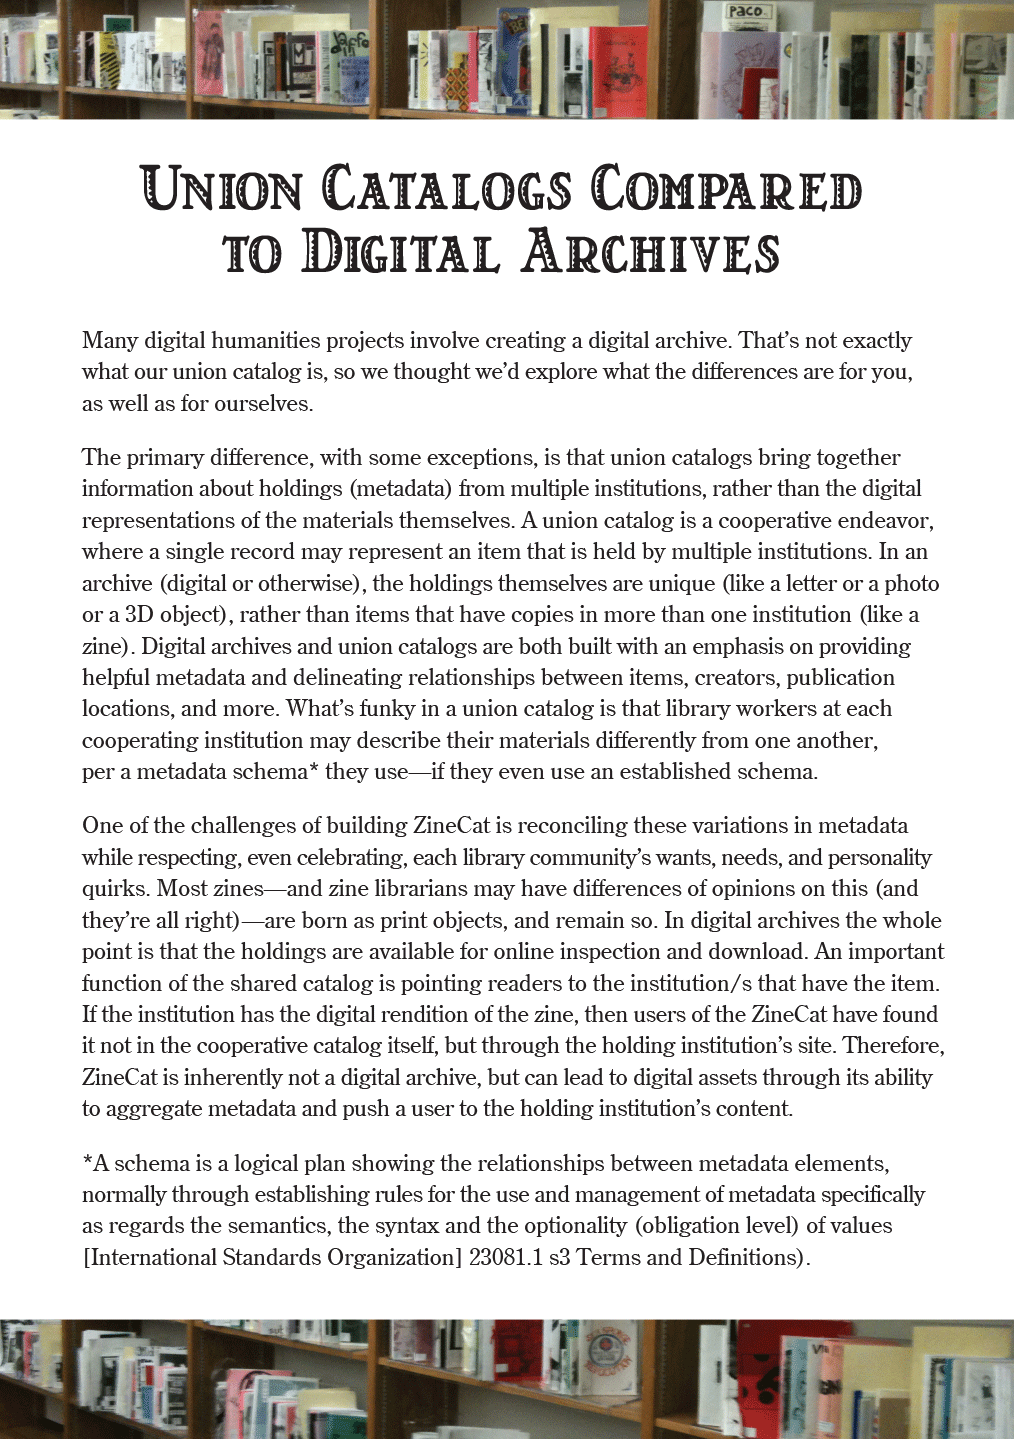 A page with text describing how union catalogs compare to digital archives.